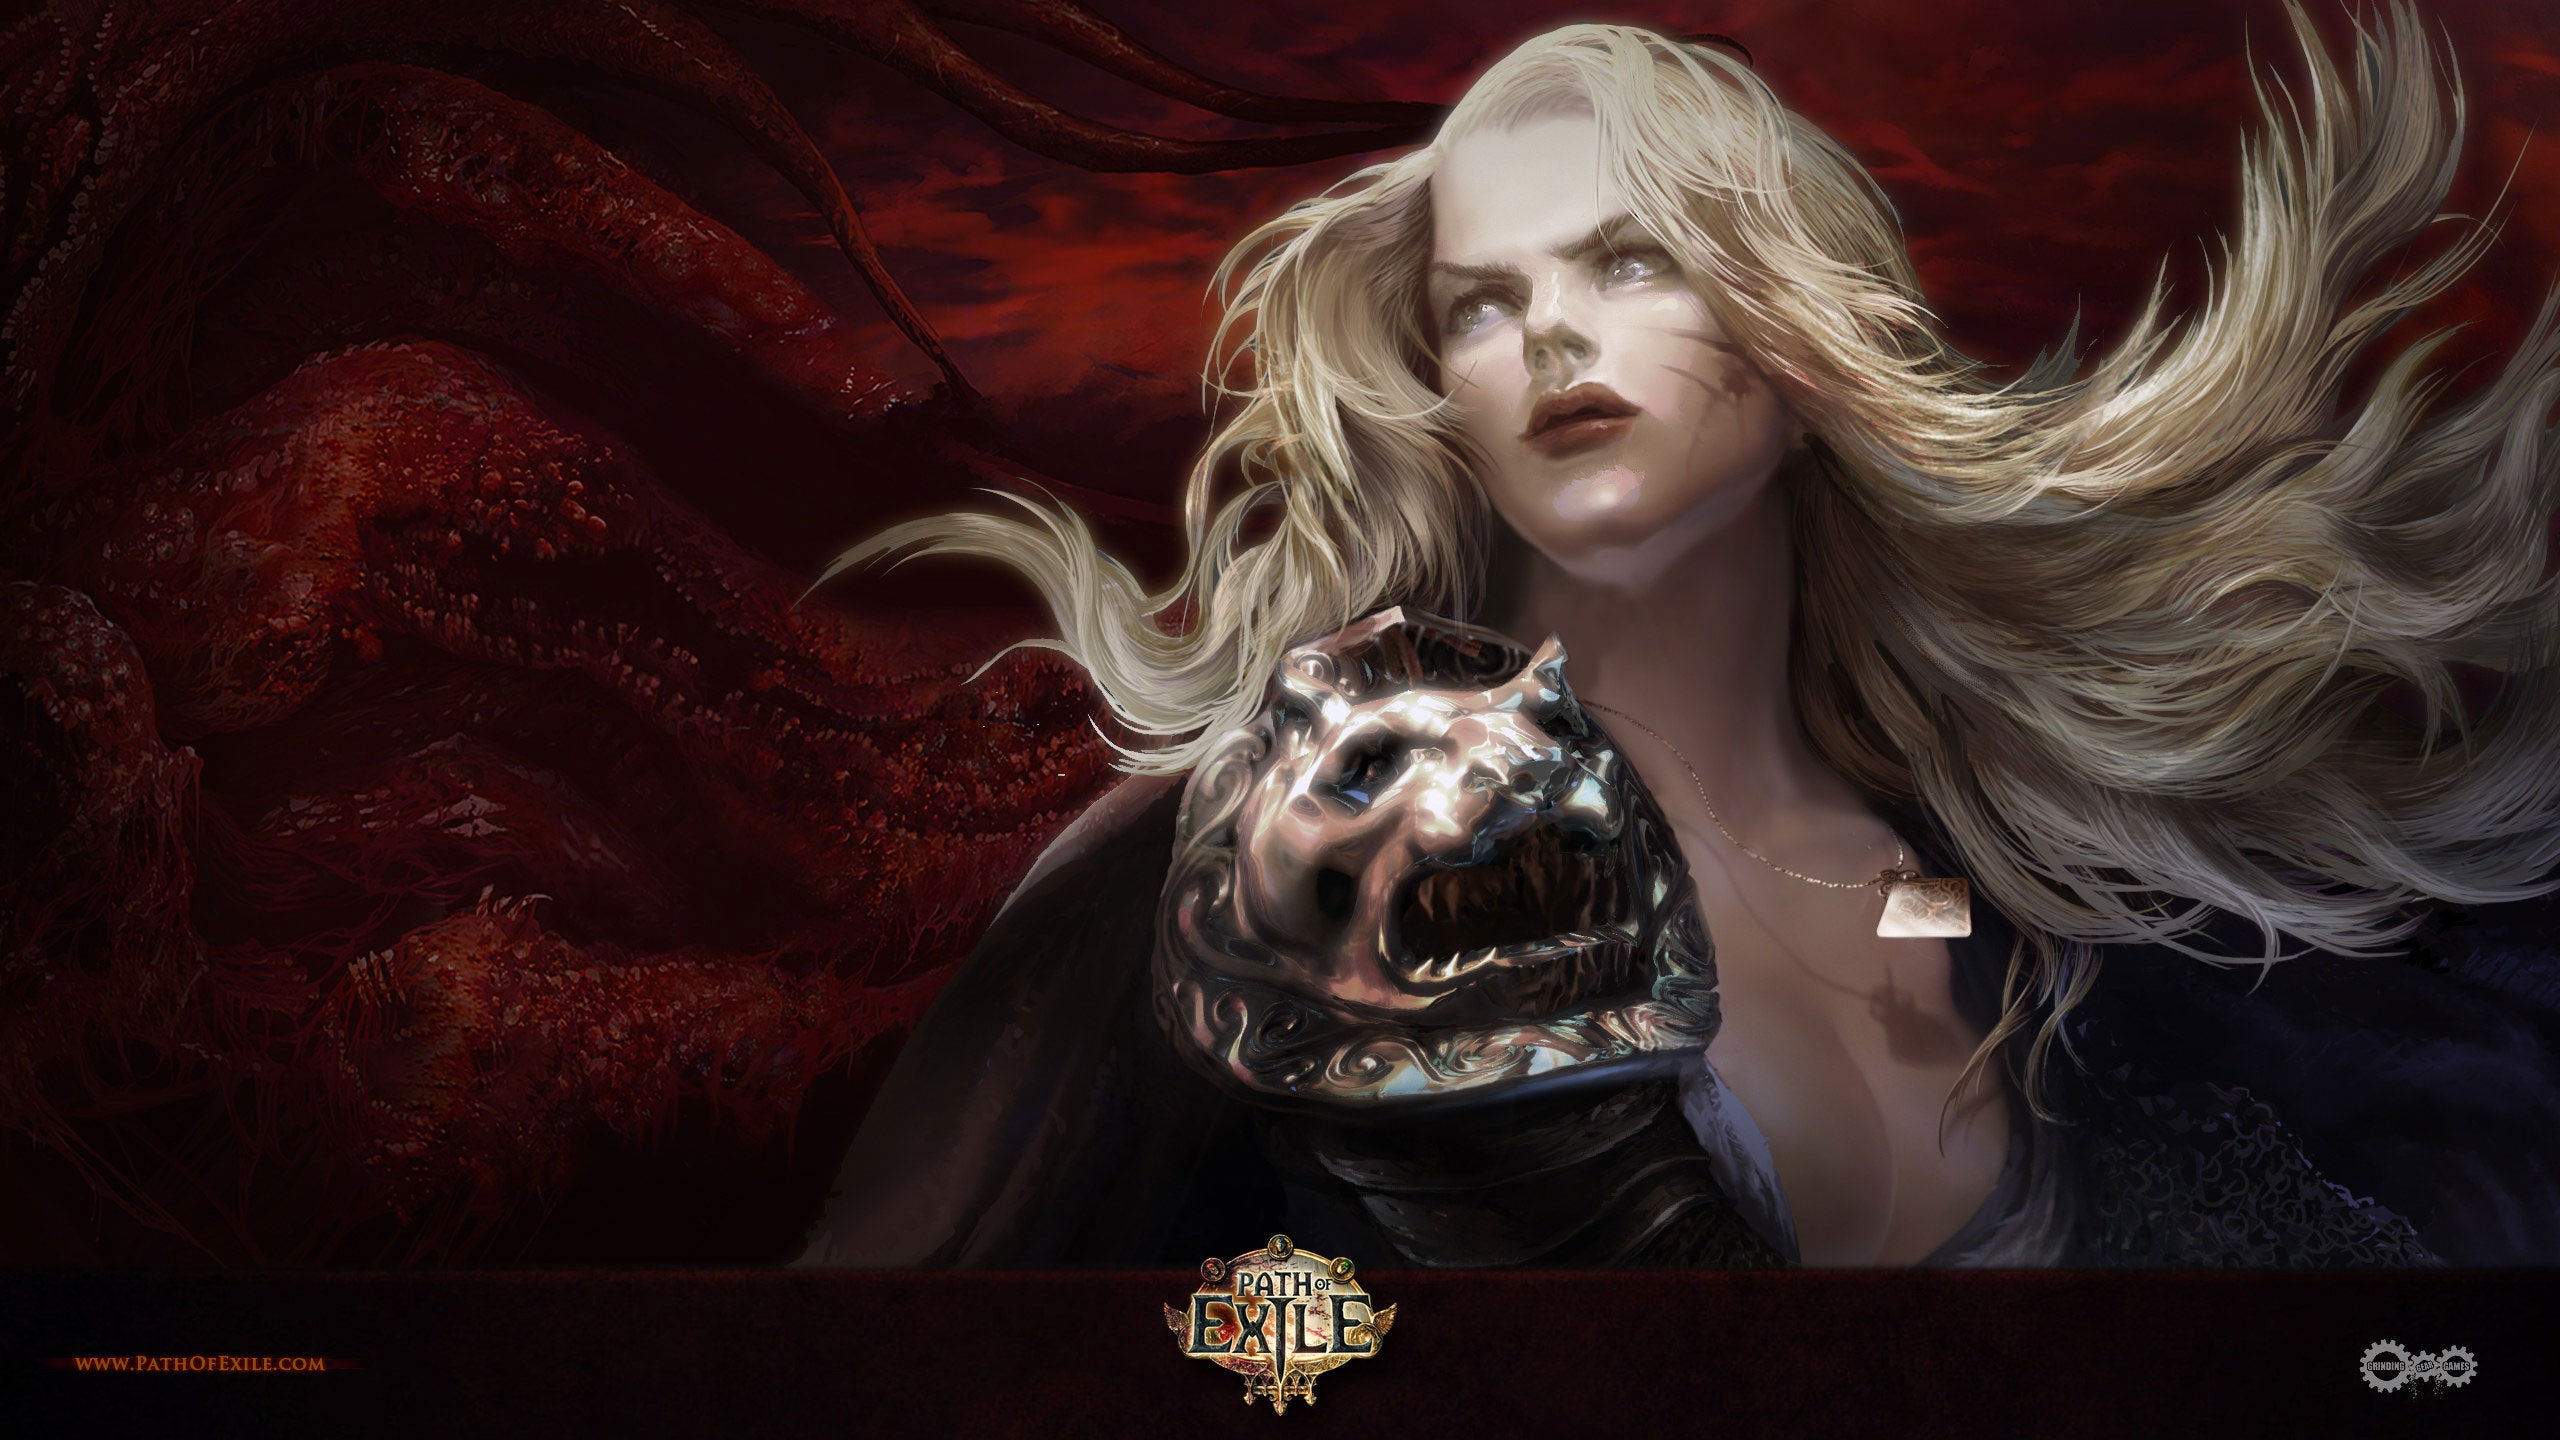 Image for Path of Exile: Expedition, the action-RPG's latest expansion, is available now